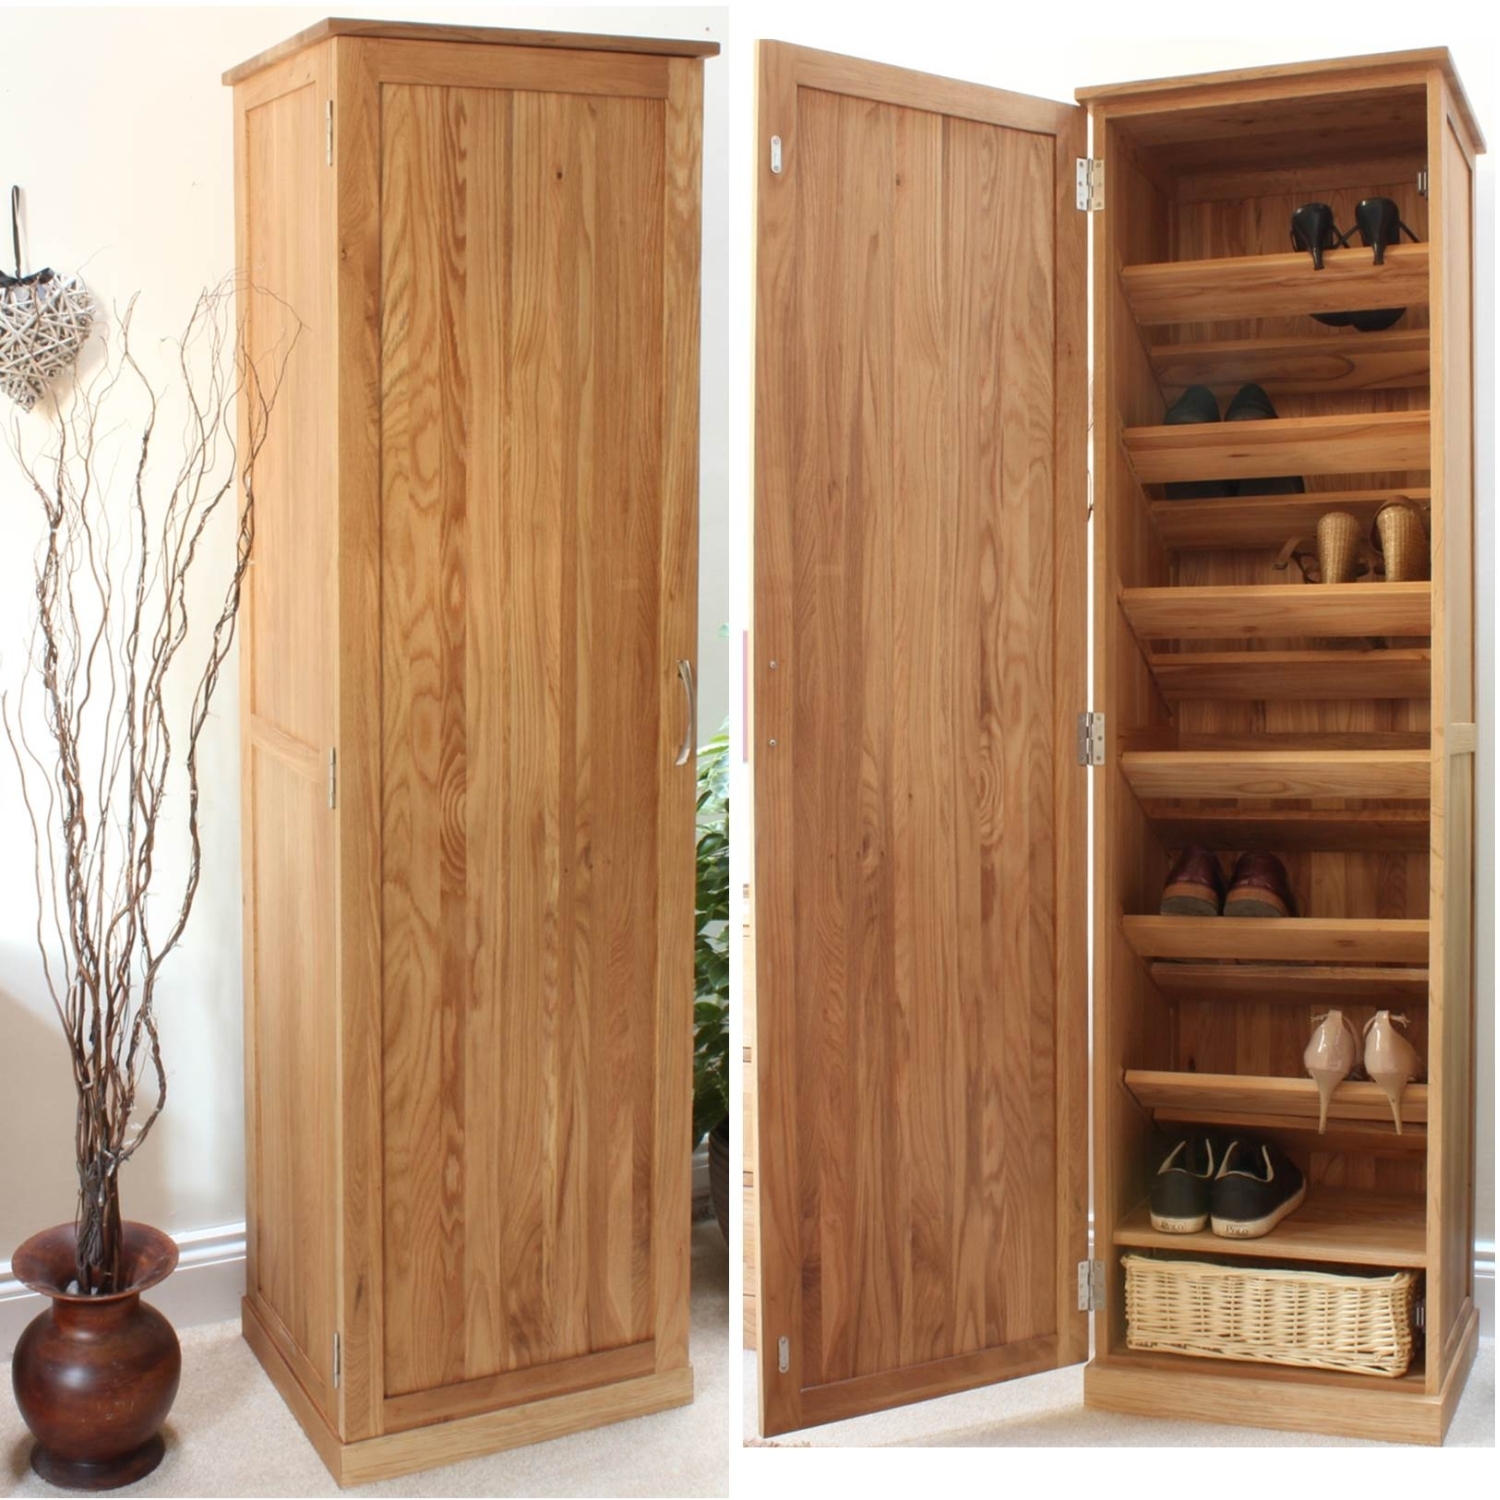 Storage Cabinets With Doors Visualhunt, Long Narrow Cabinet With Doors